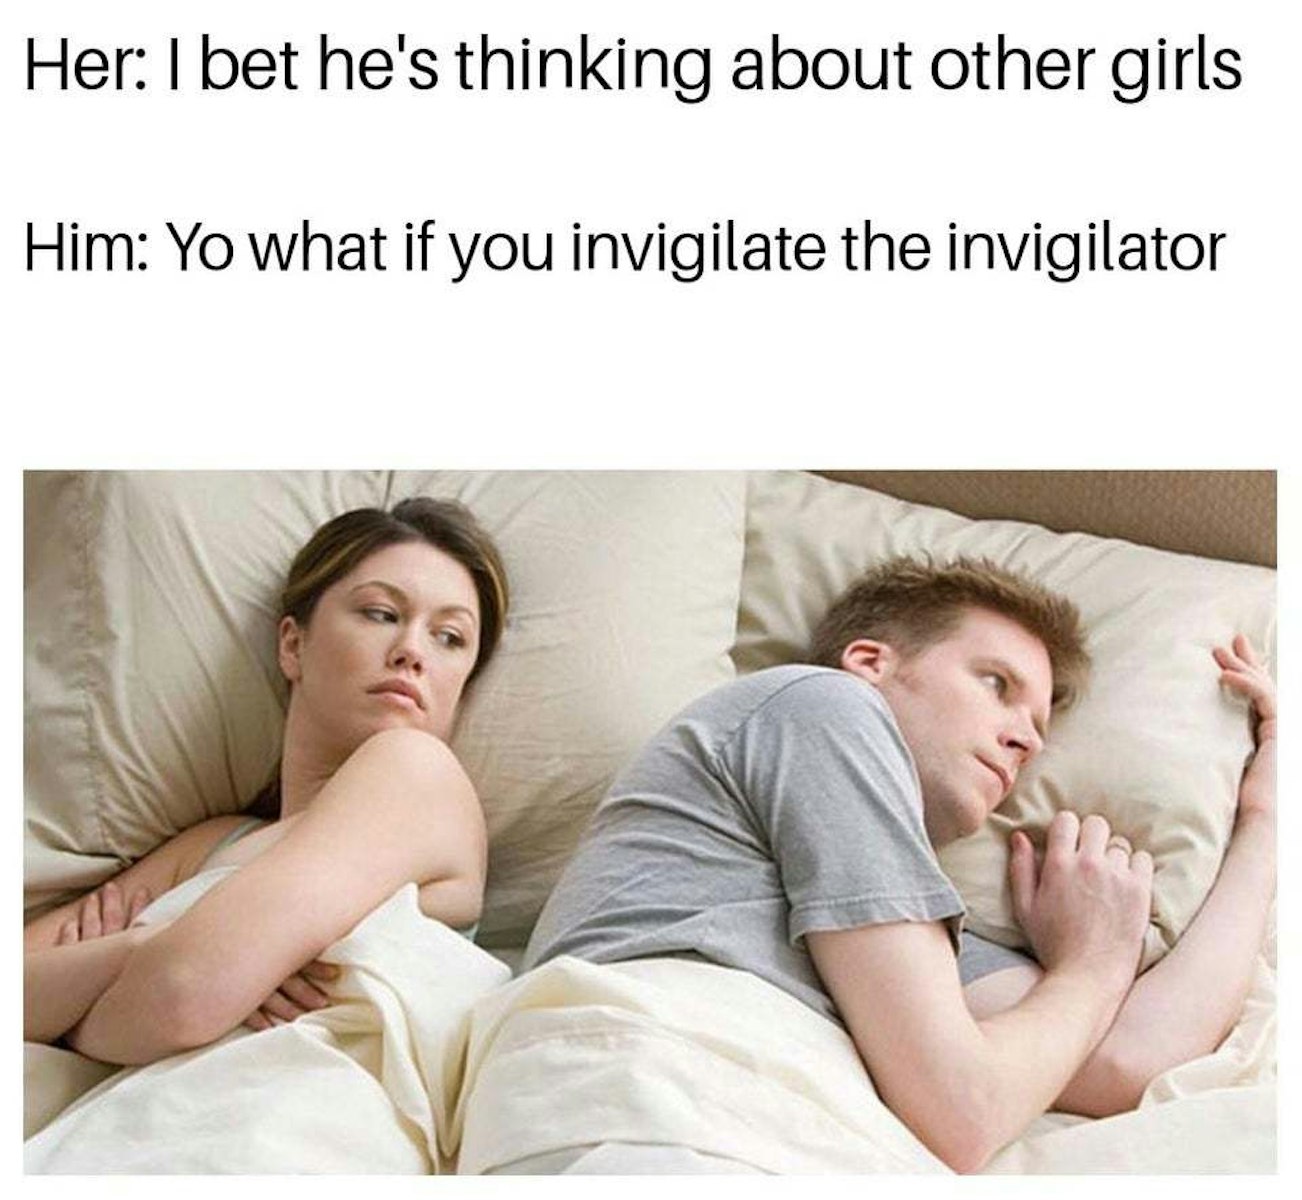 He will probably. He probably thinking about other girls meme.